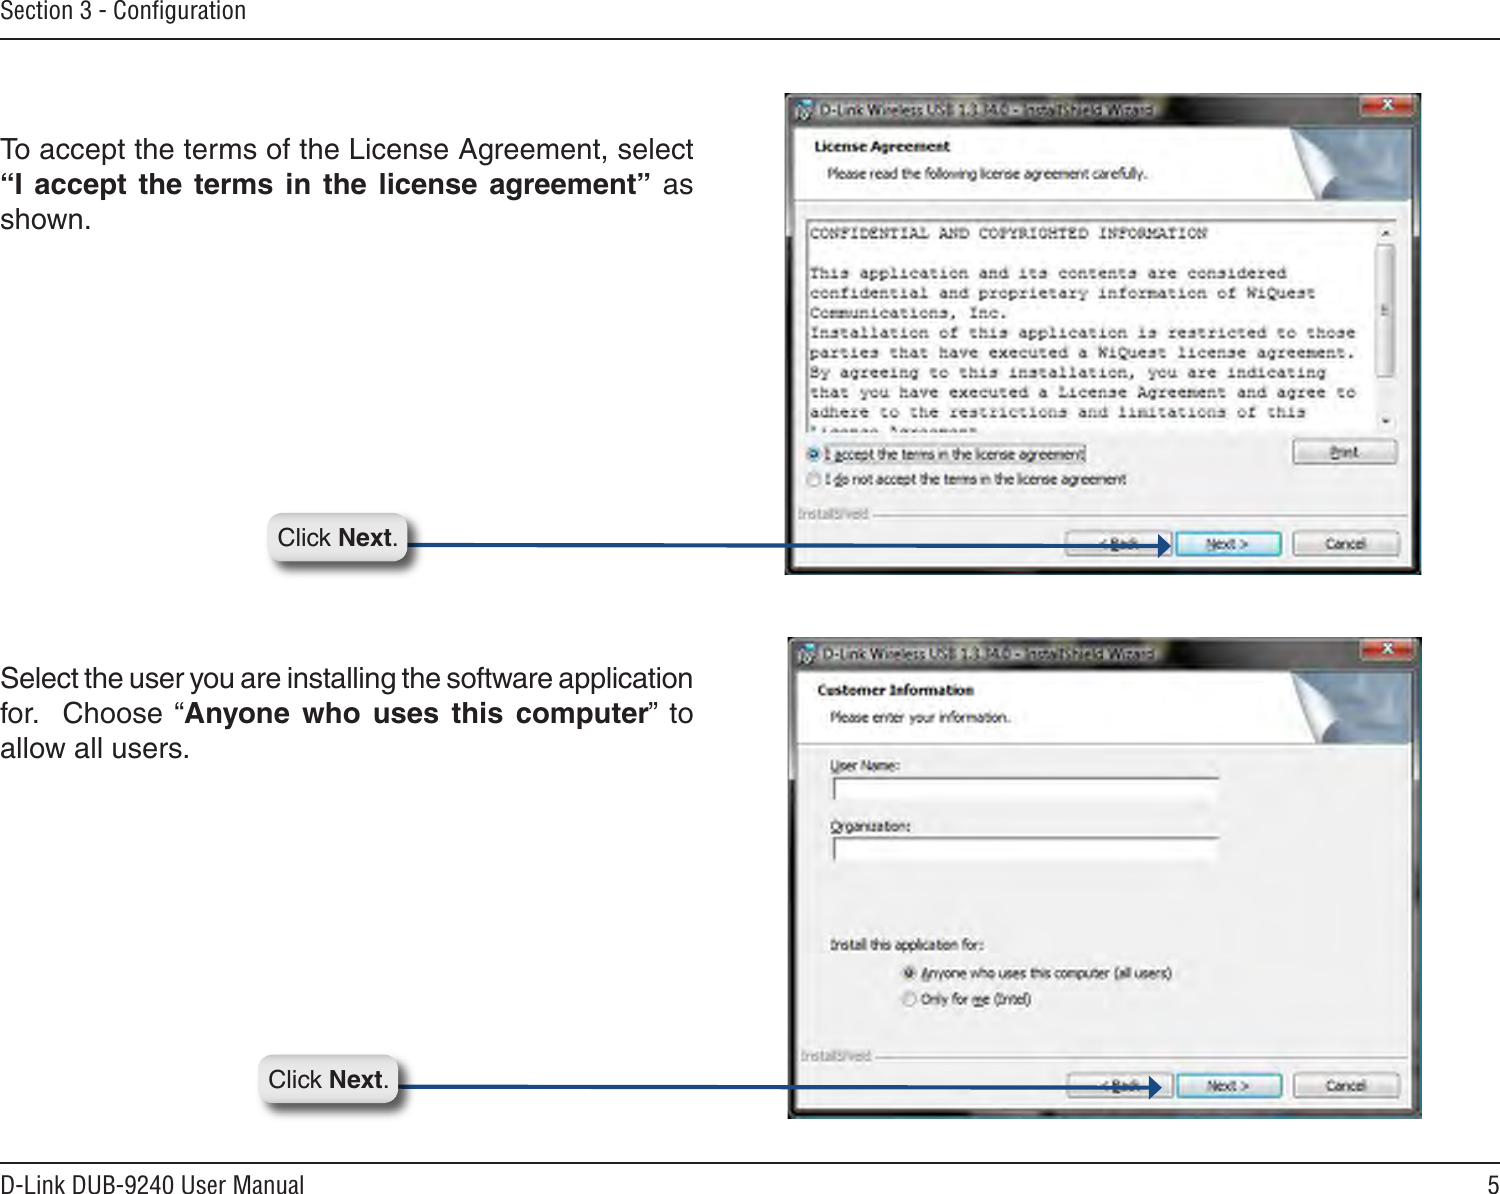 5D-Link DUB-9240 User ManualSection 3 - ConﬁgurationTo accept the terms of the License Agreement, select “I  accept  the  terms  in  the  license  agreement”  as shown.Select the user you are installing the software application for.    Choose  “Anyone  who  uses  this  computer”  to allow all users.Click Next.Click Next.